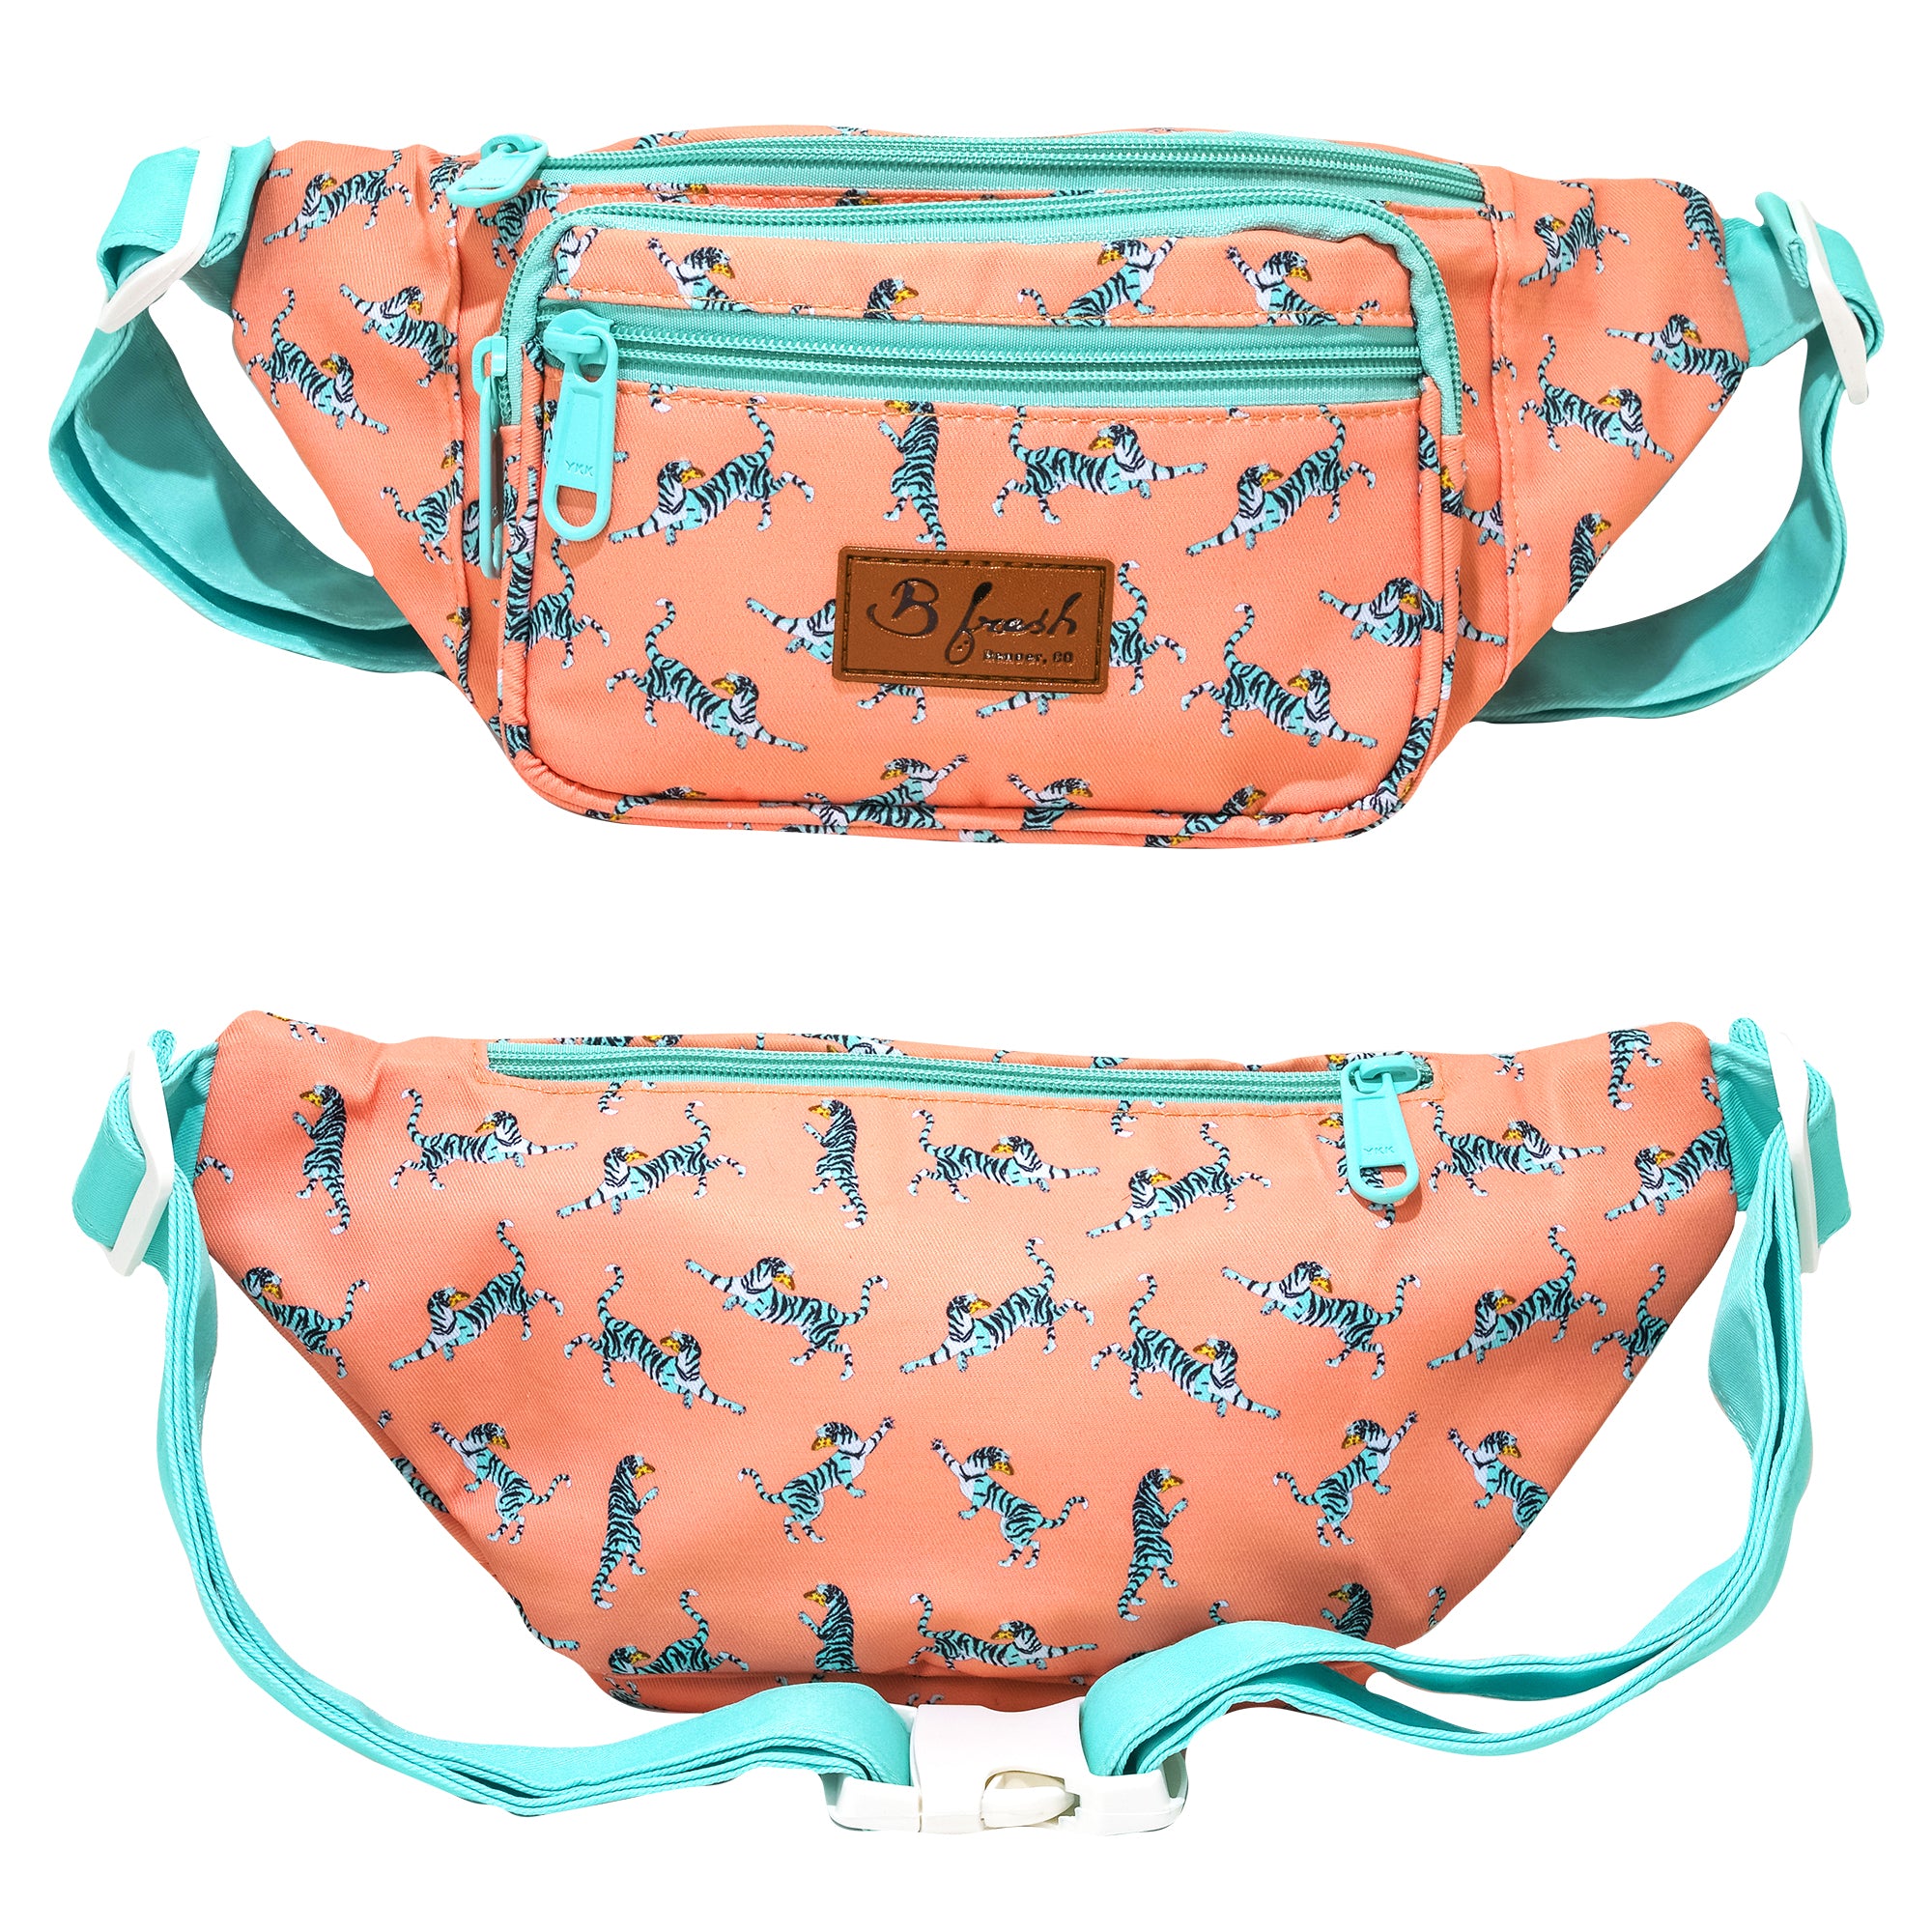 Pizza tiger vintage inspired retro fanny pack orange and blue throwback design with tigers eating pizza. B Fresh Gear